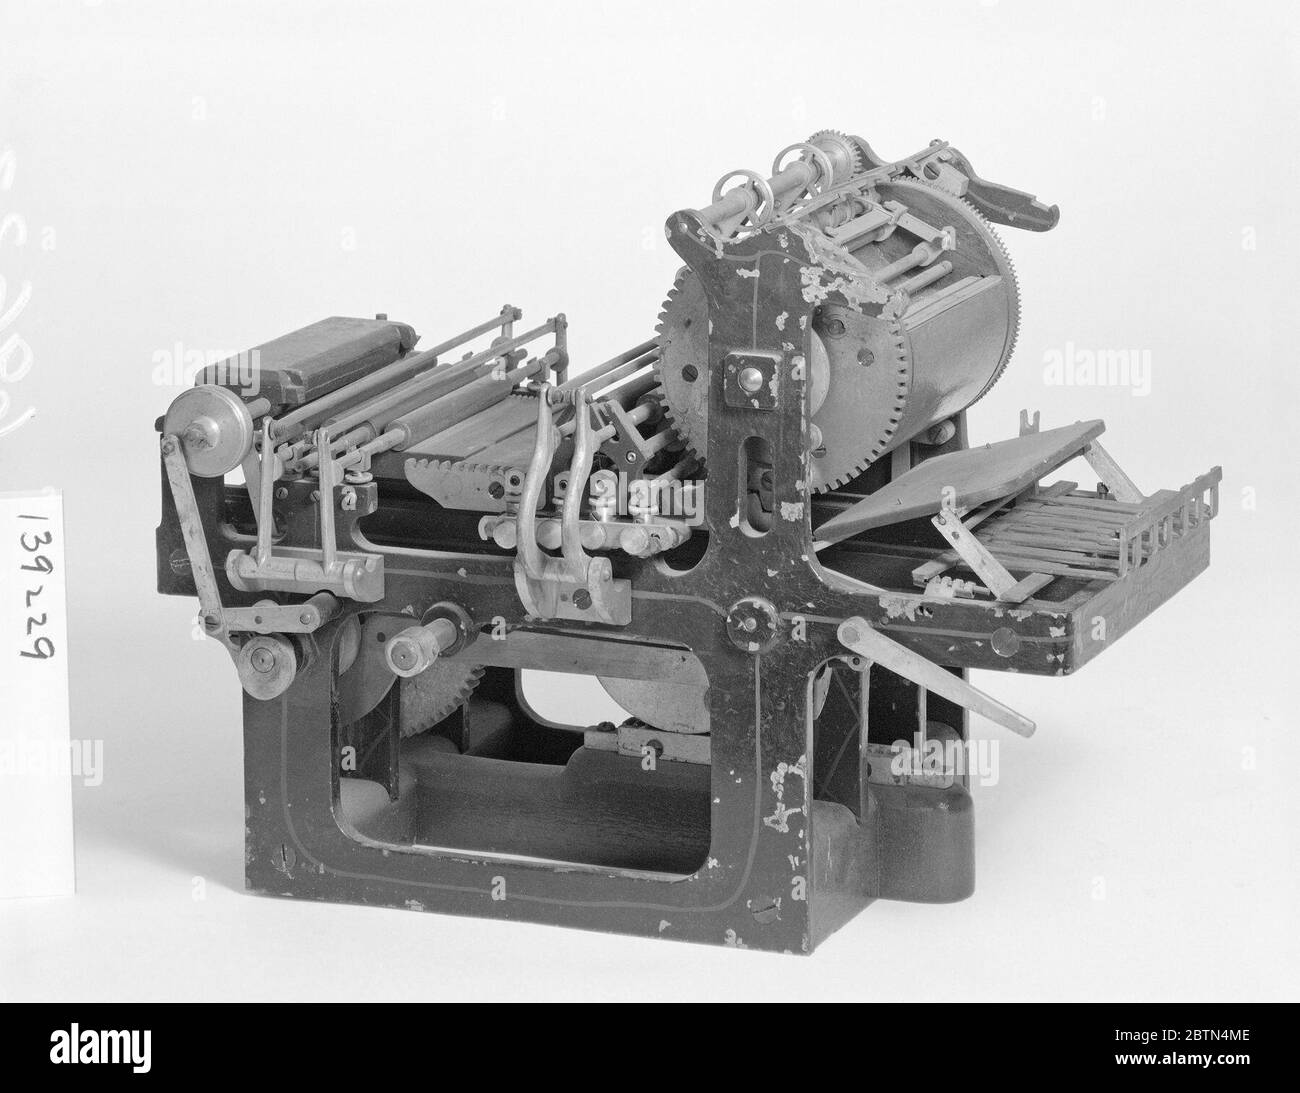 Patent Model for an Improvement in StopCylinder Presses. This patent model demonstrates an invention for improvement in stop-cylinder presses which was granted number 139229. The patent relates to the method of stopping and starting the cylinder, feeding and delivering paper, and distributing ink. Stock Photo